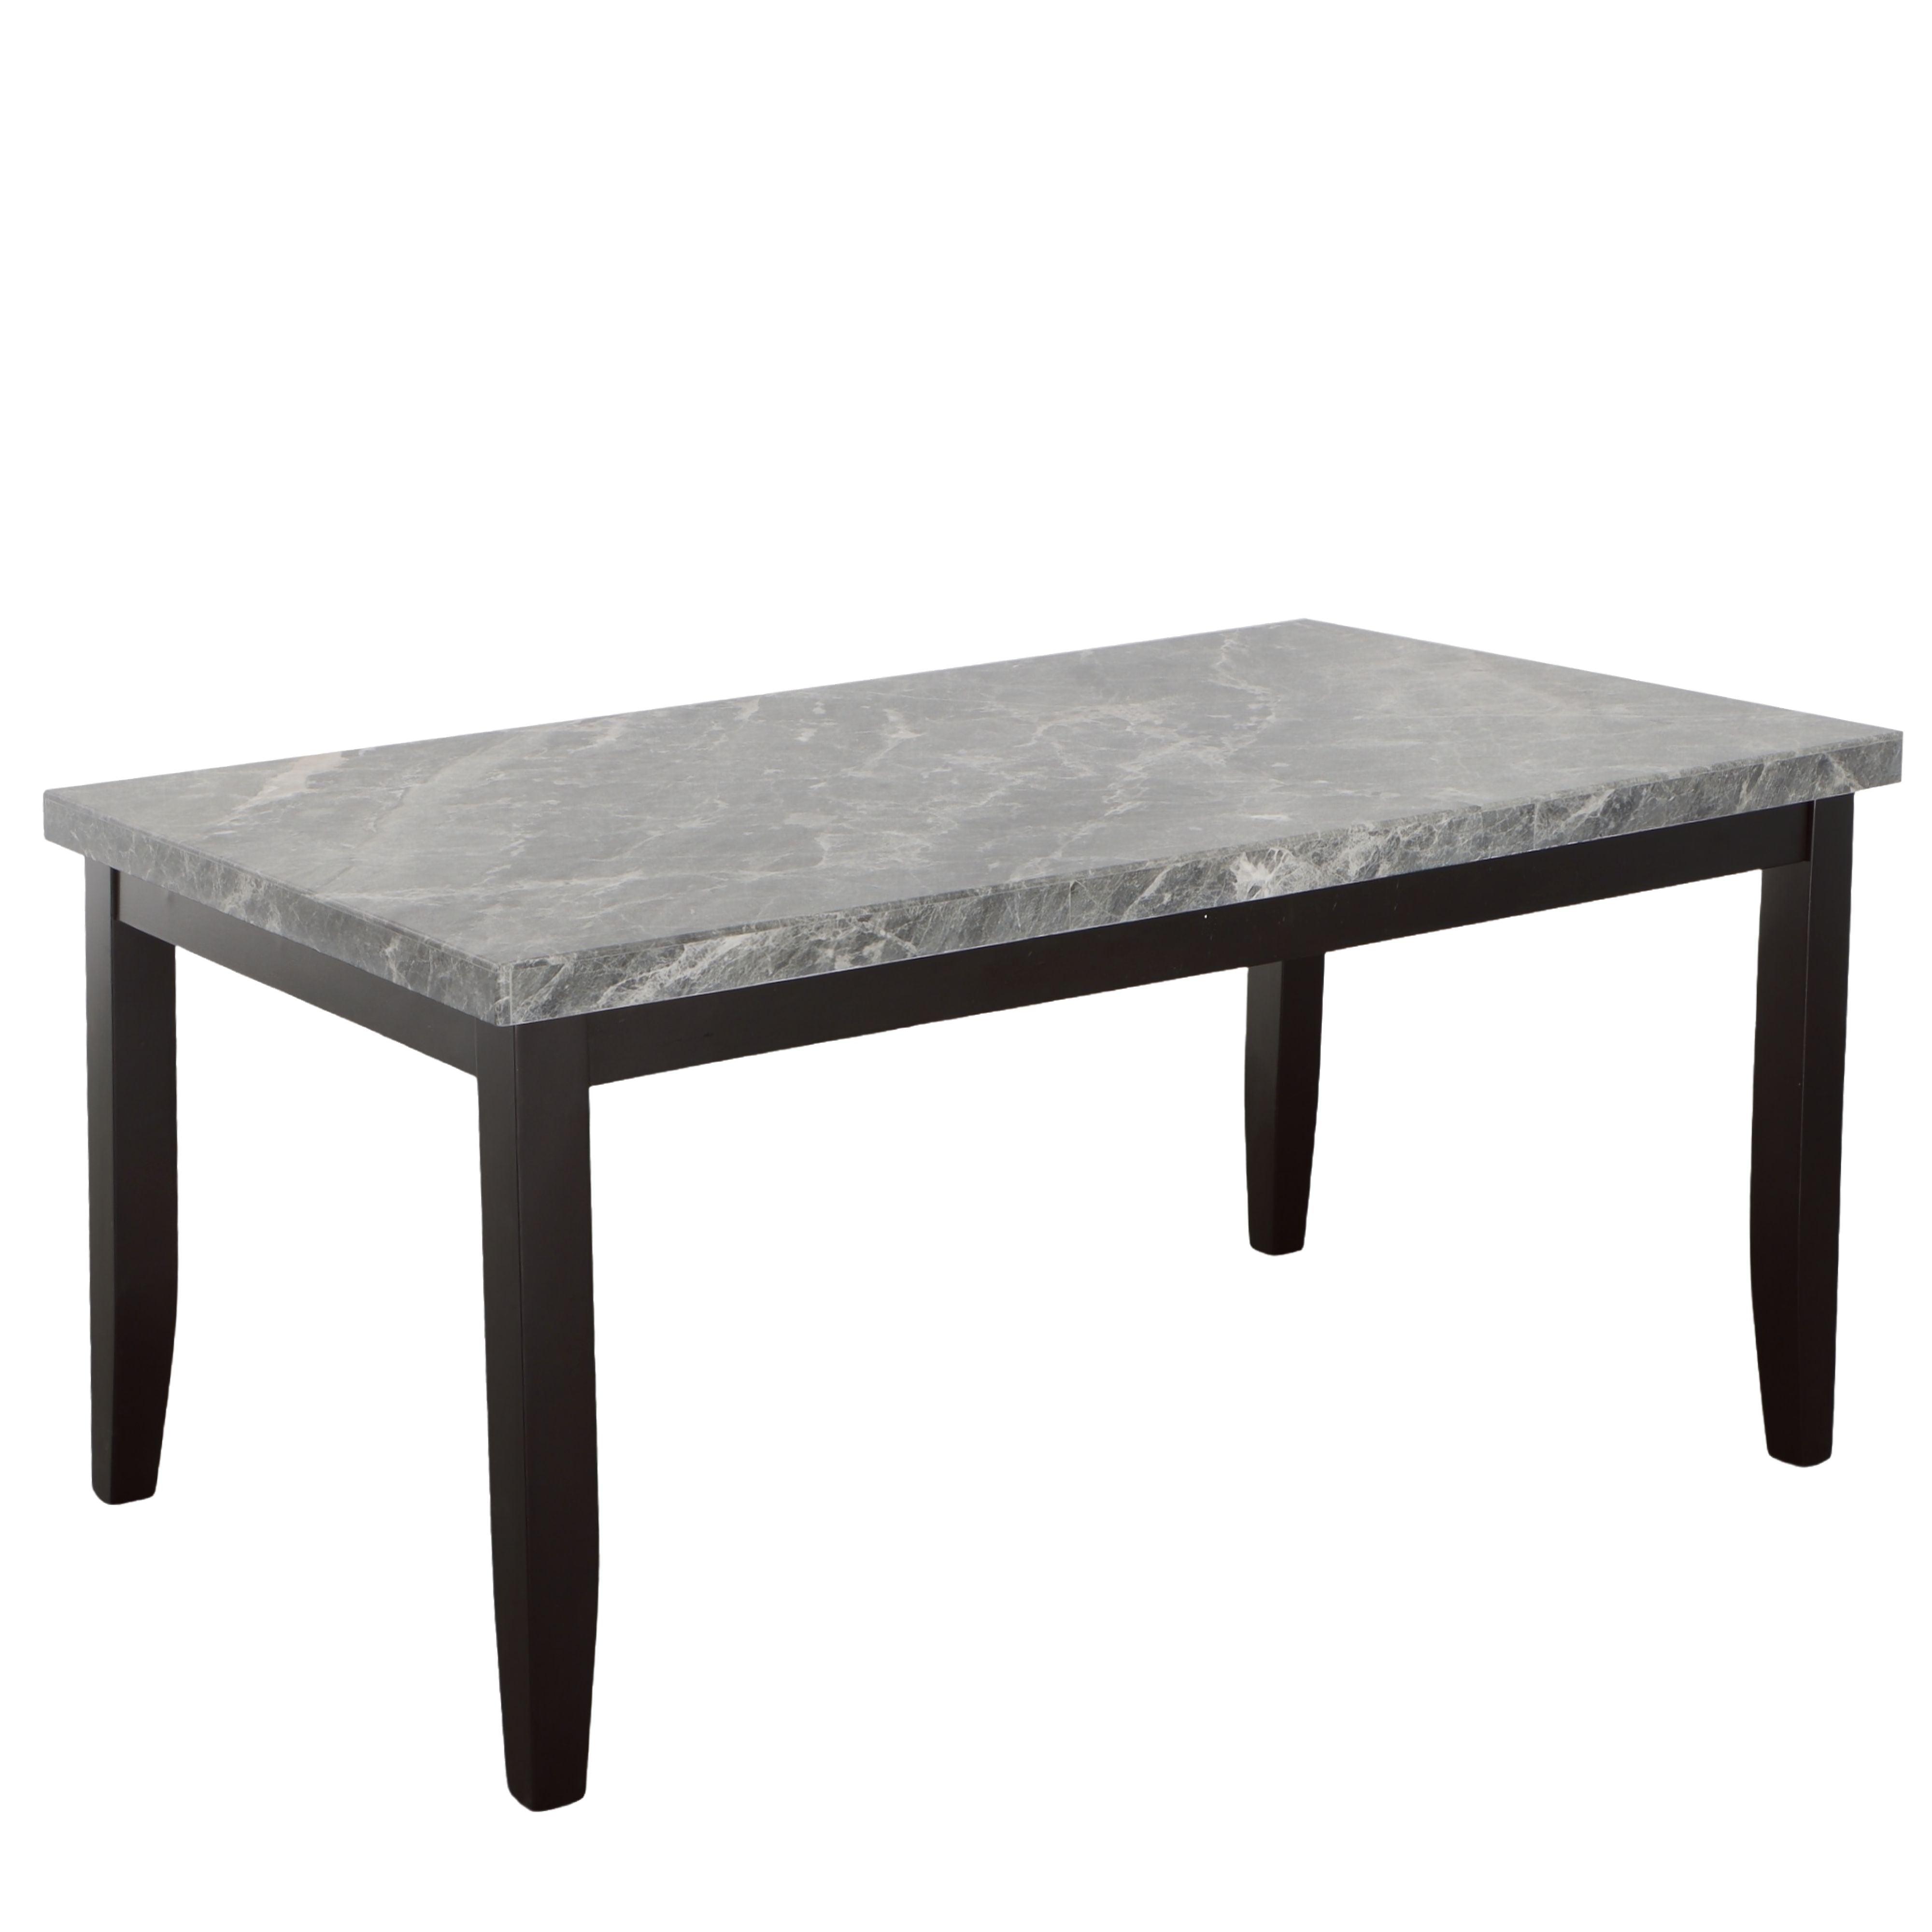 Steve Silver Furniture - Napoli - Gray Marble Top Dining Table - Dark Gray - 5th Avenue Furniture